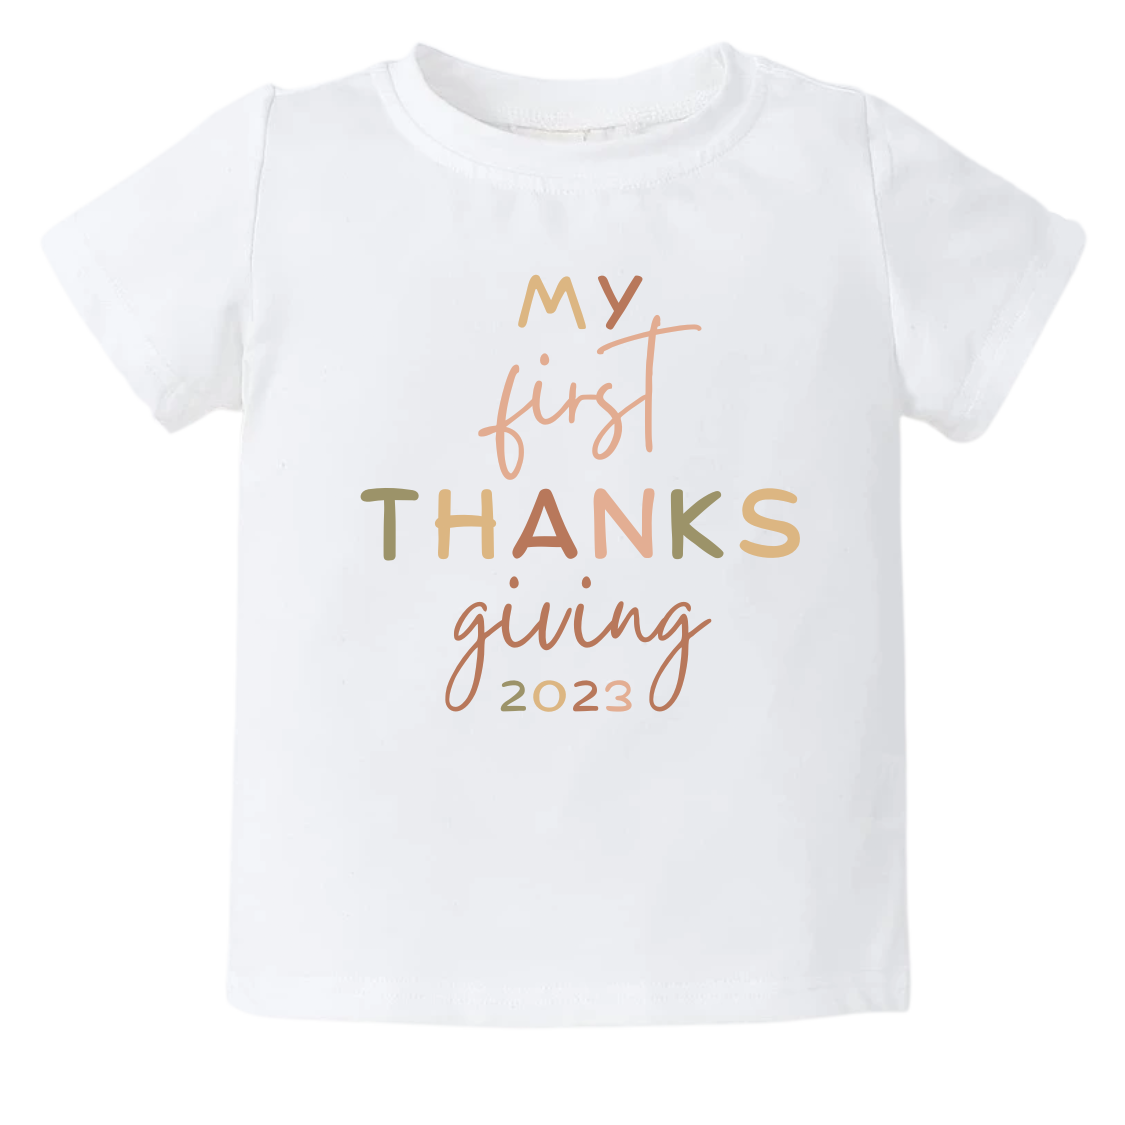 Kid's t-shirt with cute 'My First Thanksgiving' text design.